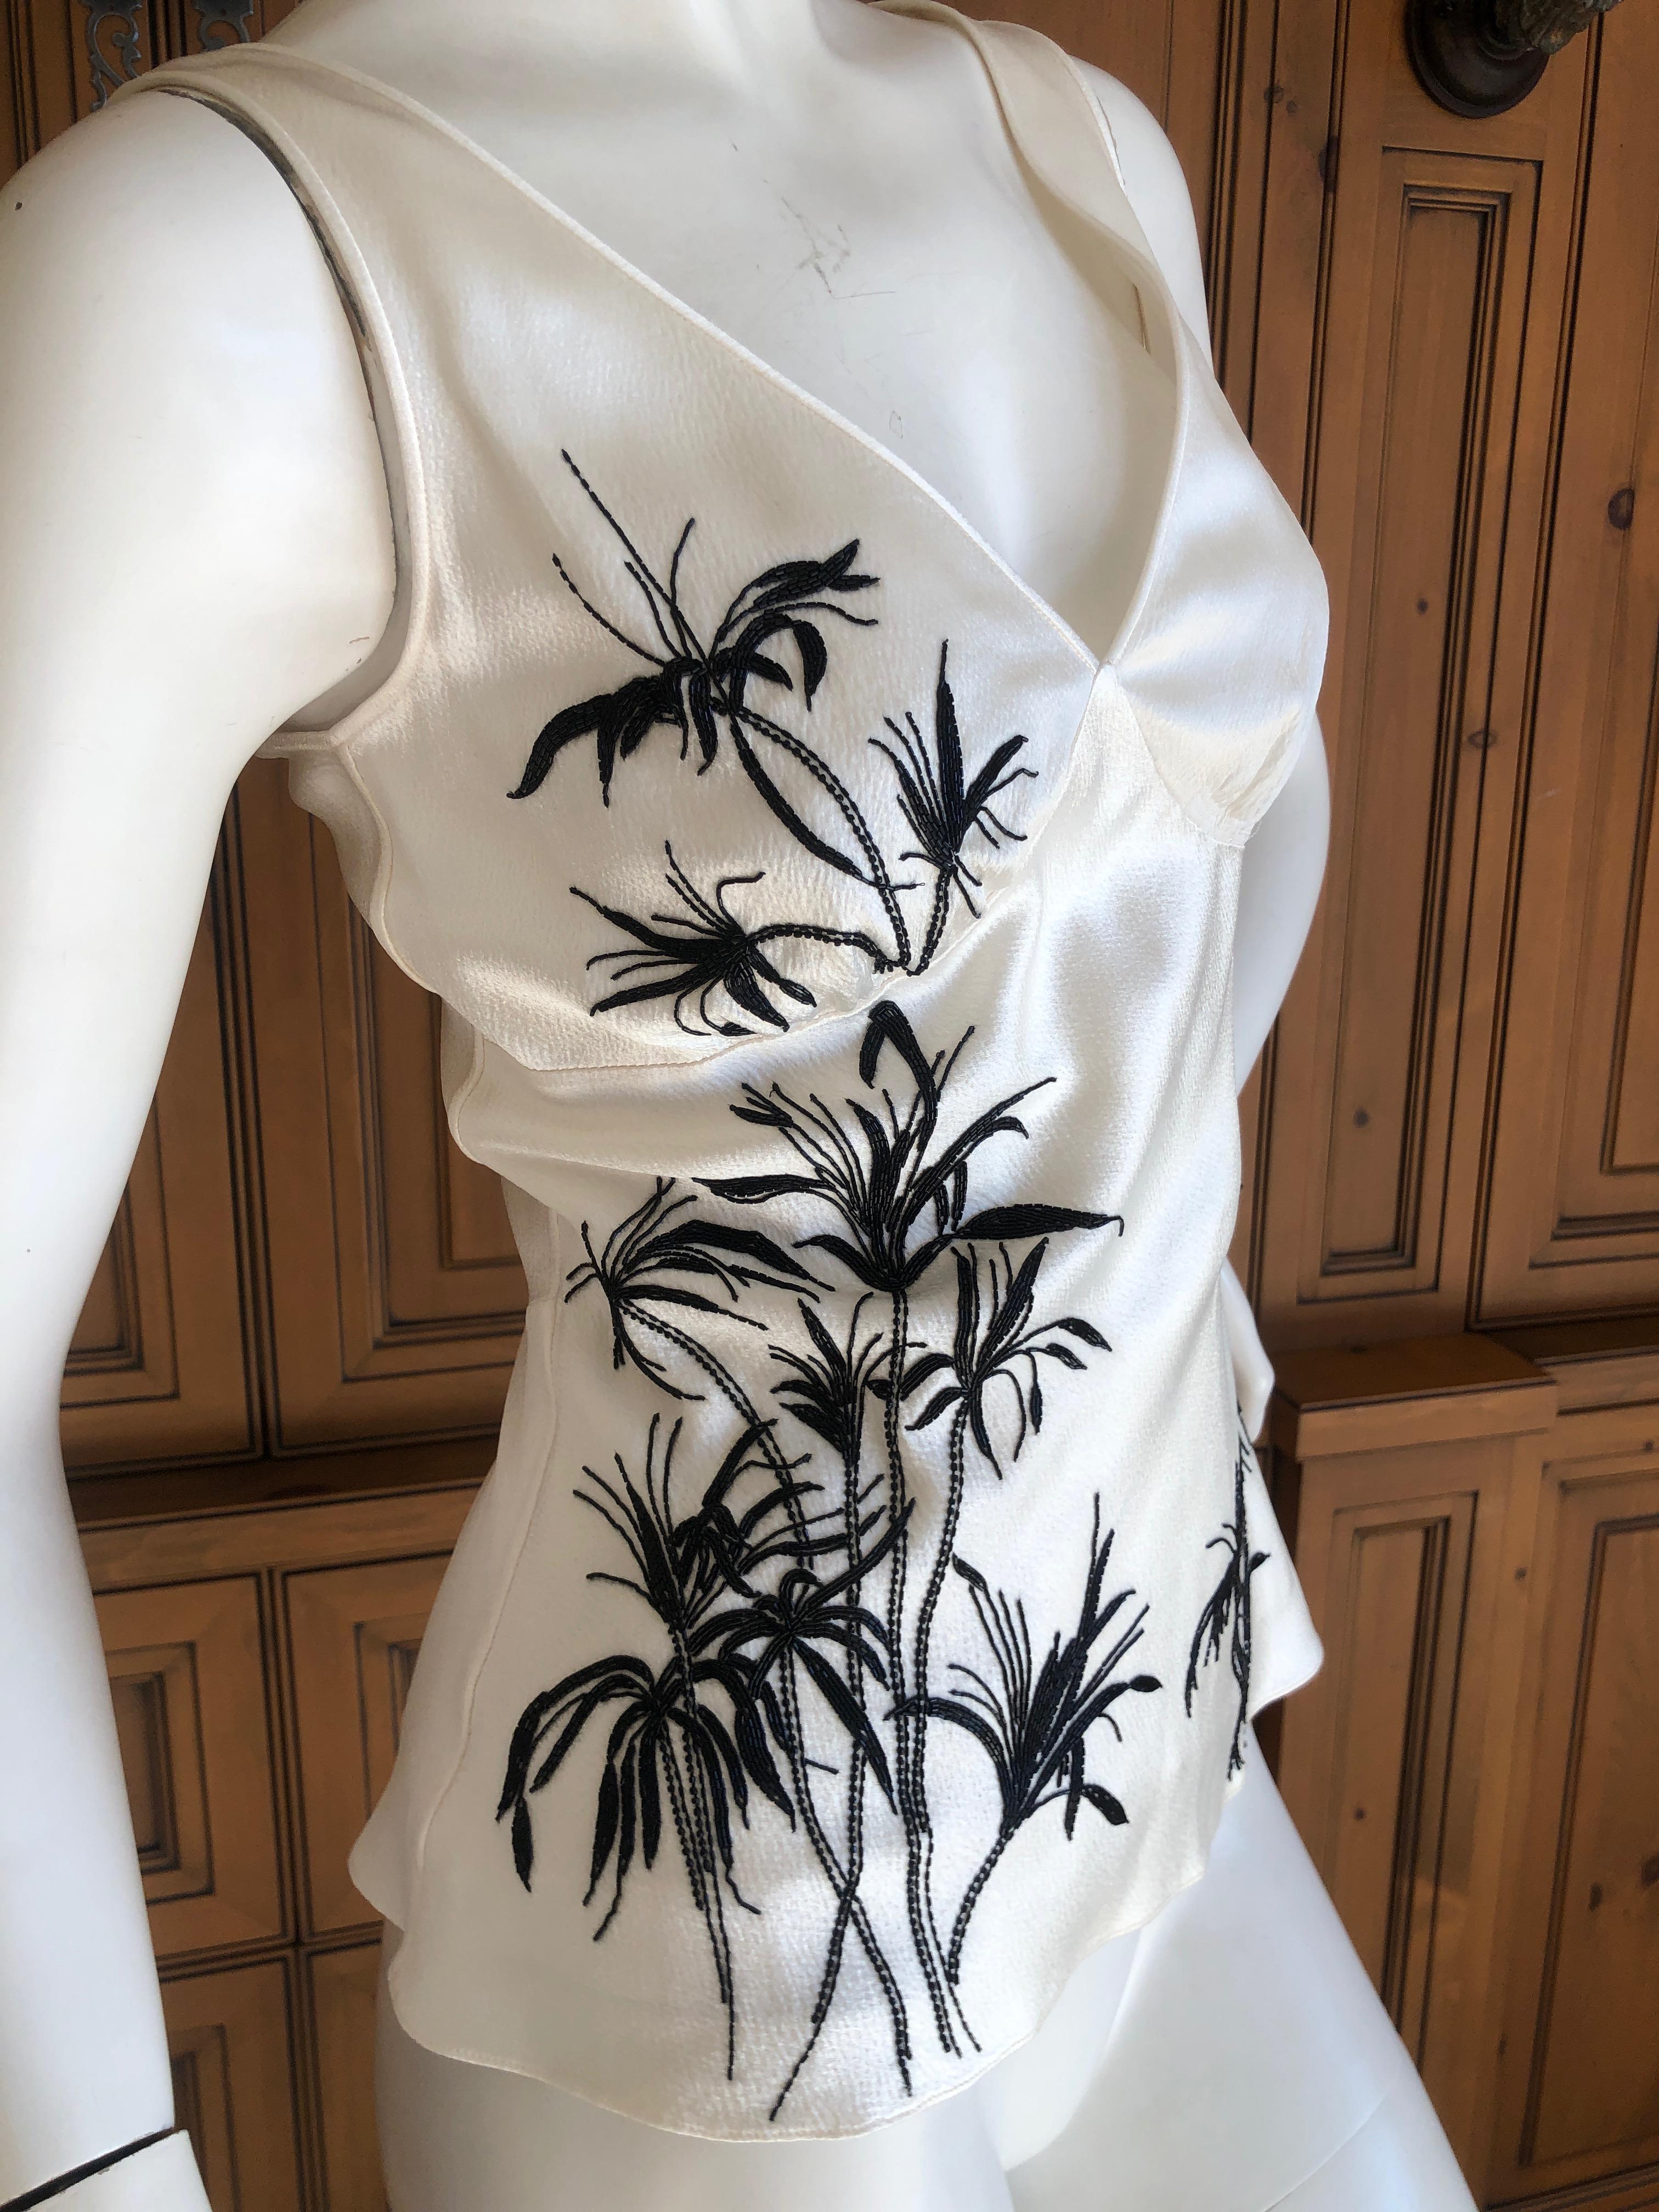 Christian Dior by Gianfranco Ferre '94 Hammered Silk Top w Lesage Floral Beading (Grau)